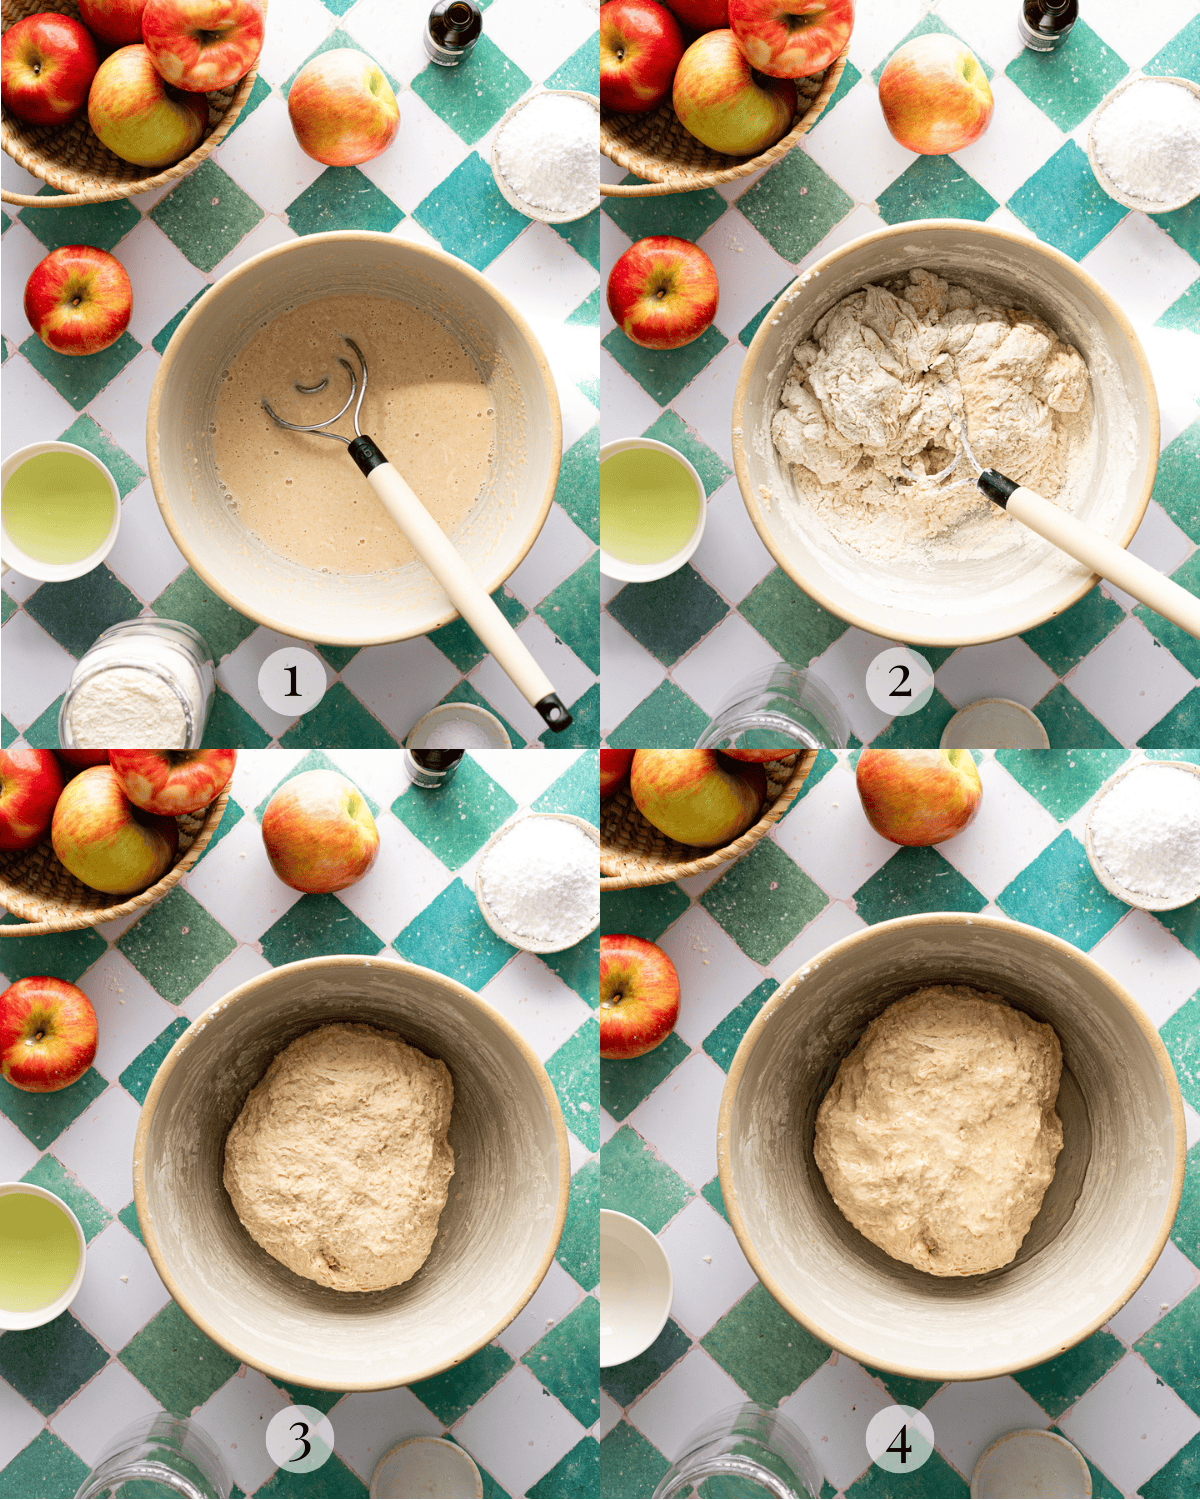 4 photo series showing making cinnamon Roll dough in large mixing bowl. 